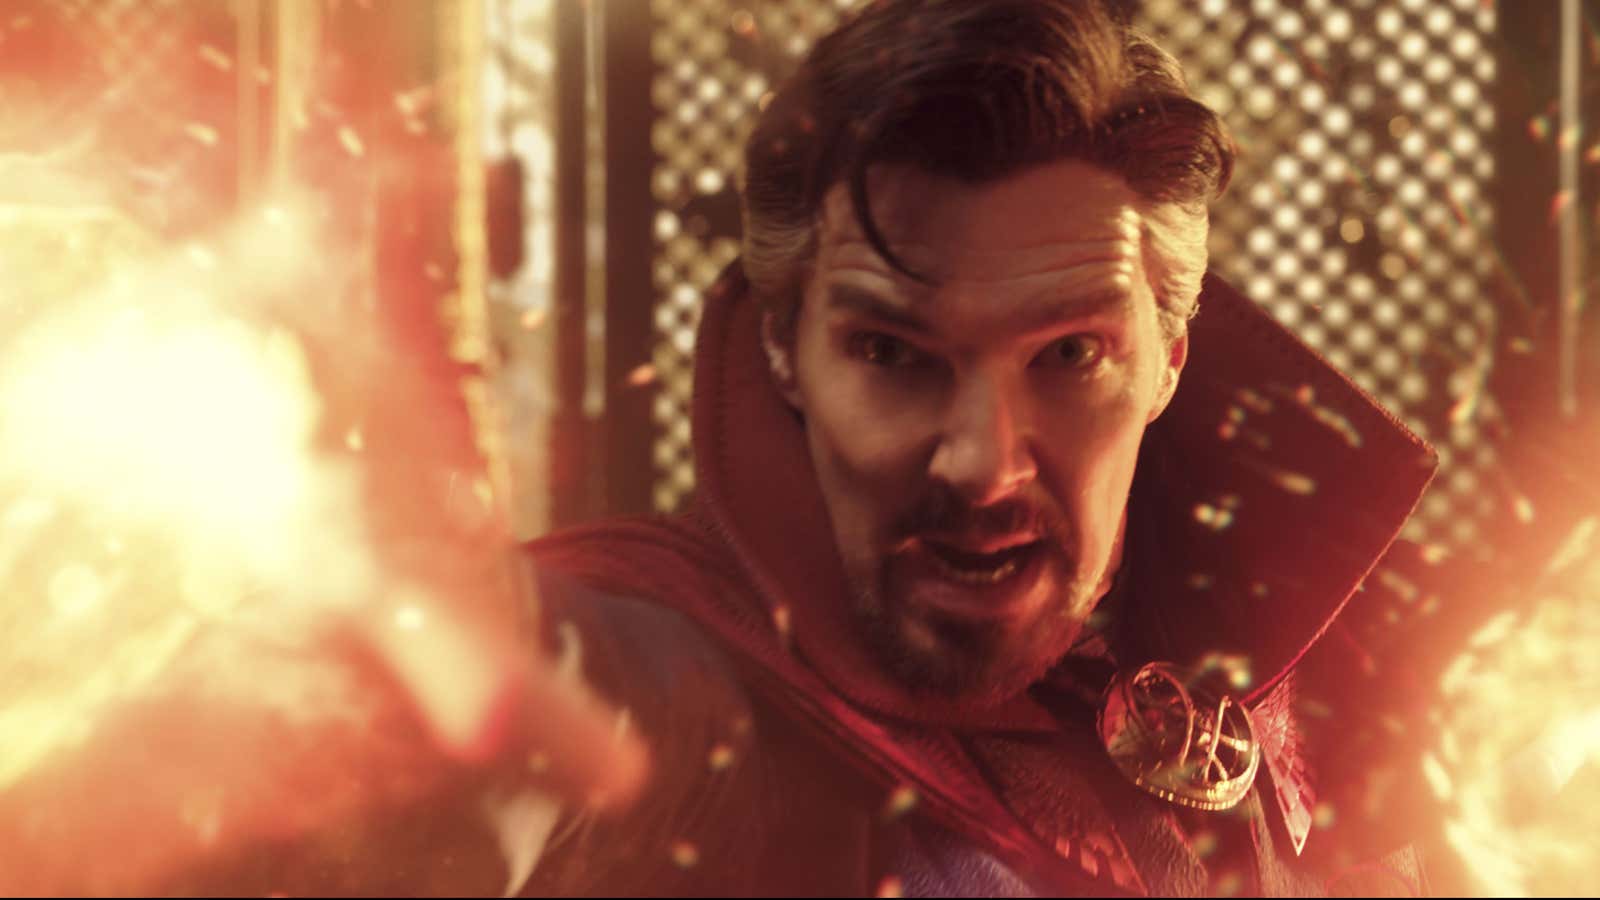 Benedict Cumberbatch as Doctor Strange in “Doctor Strange in the Multiverse of Madness”